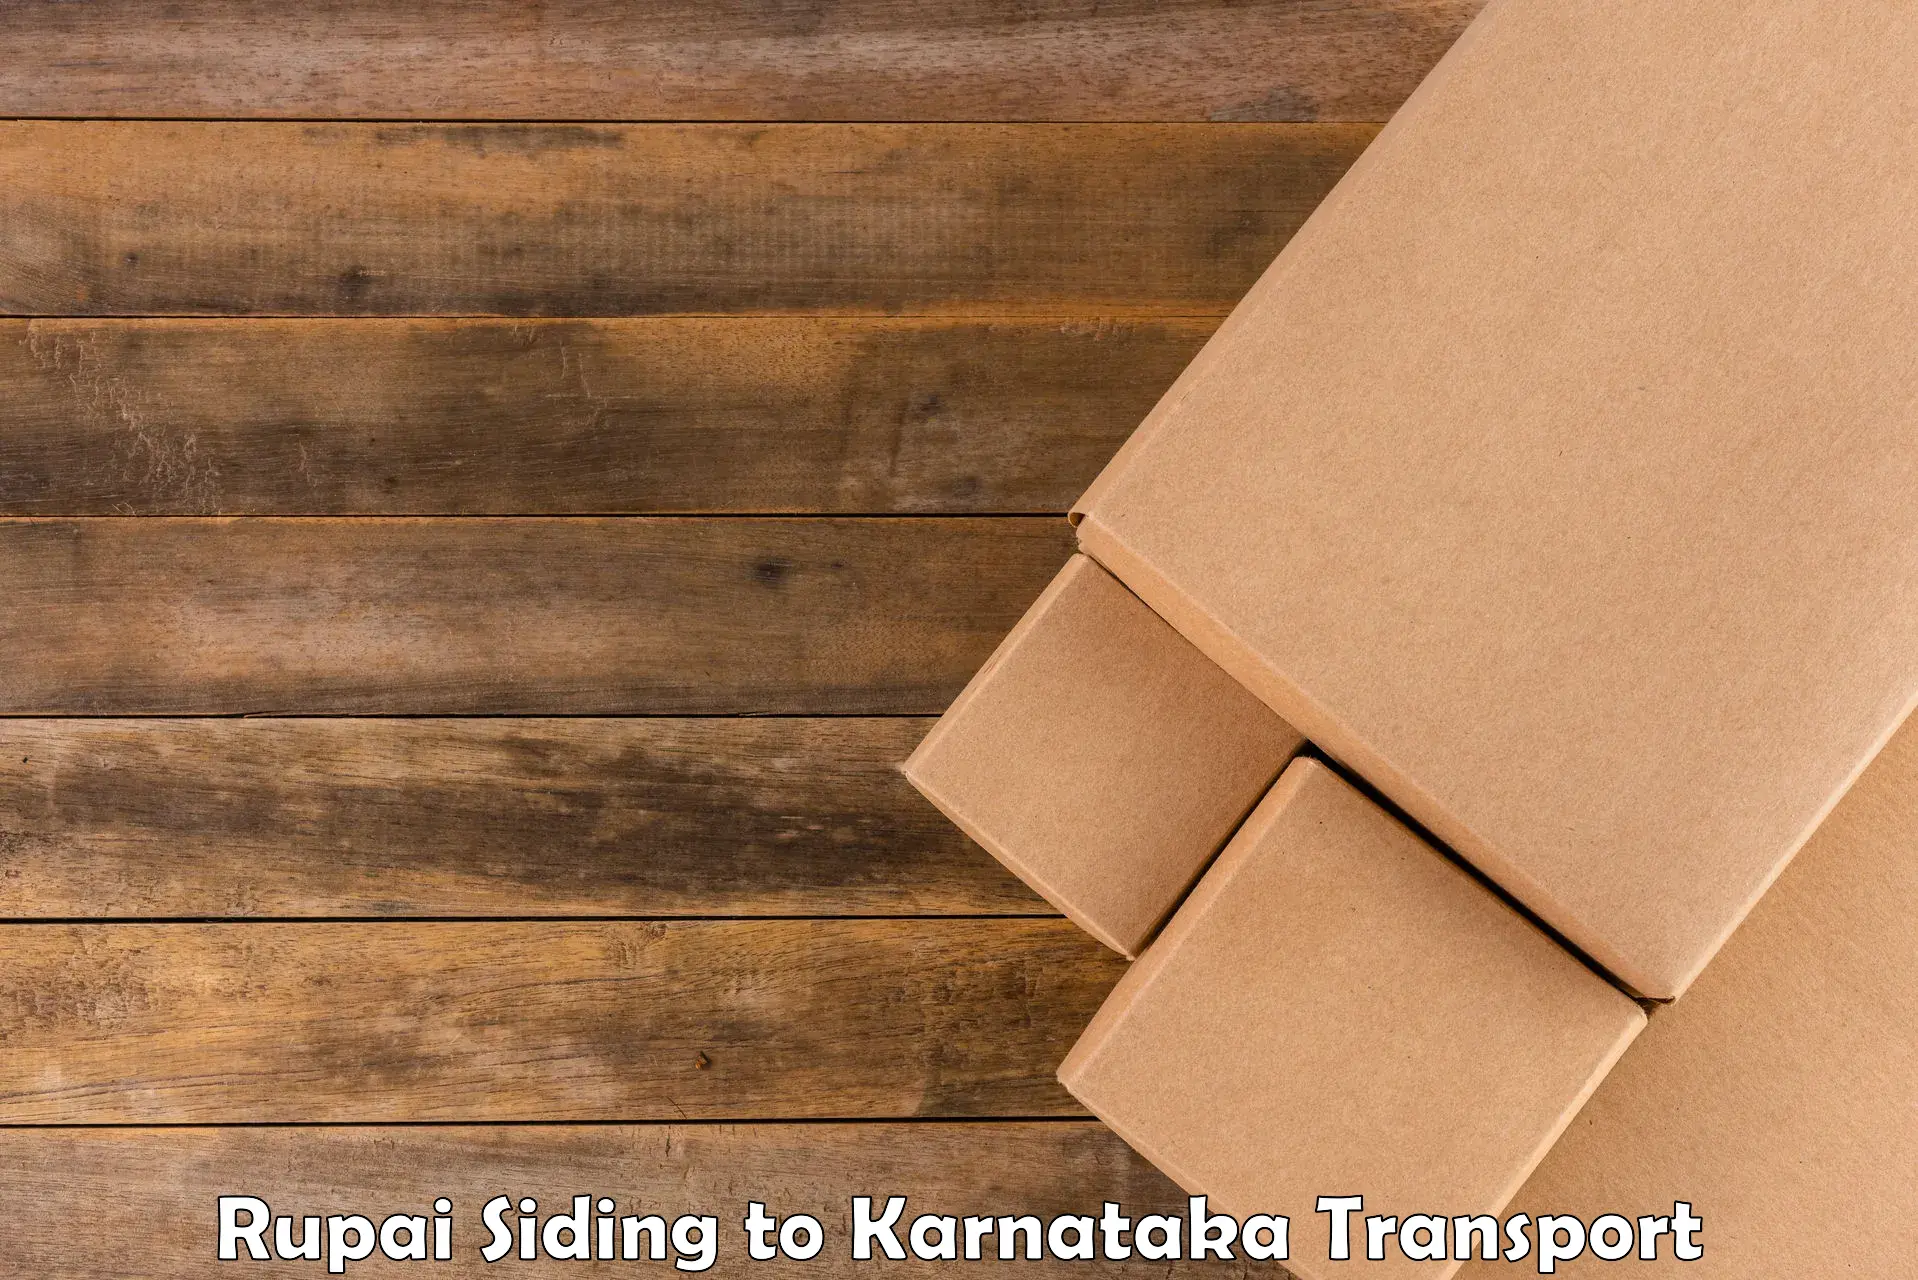 Transport bike from one state to another Rupai Siding to Hangal